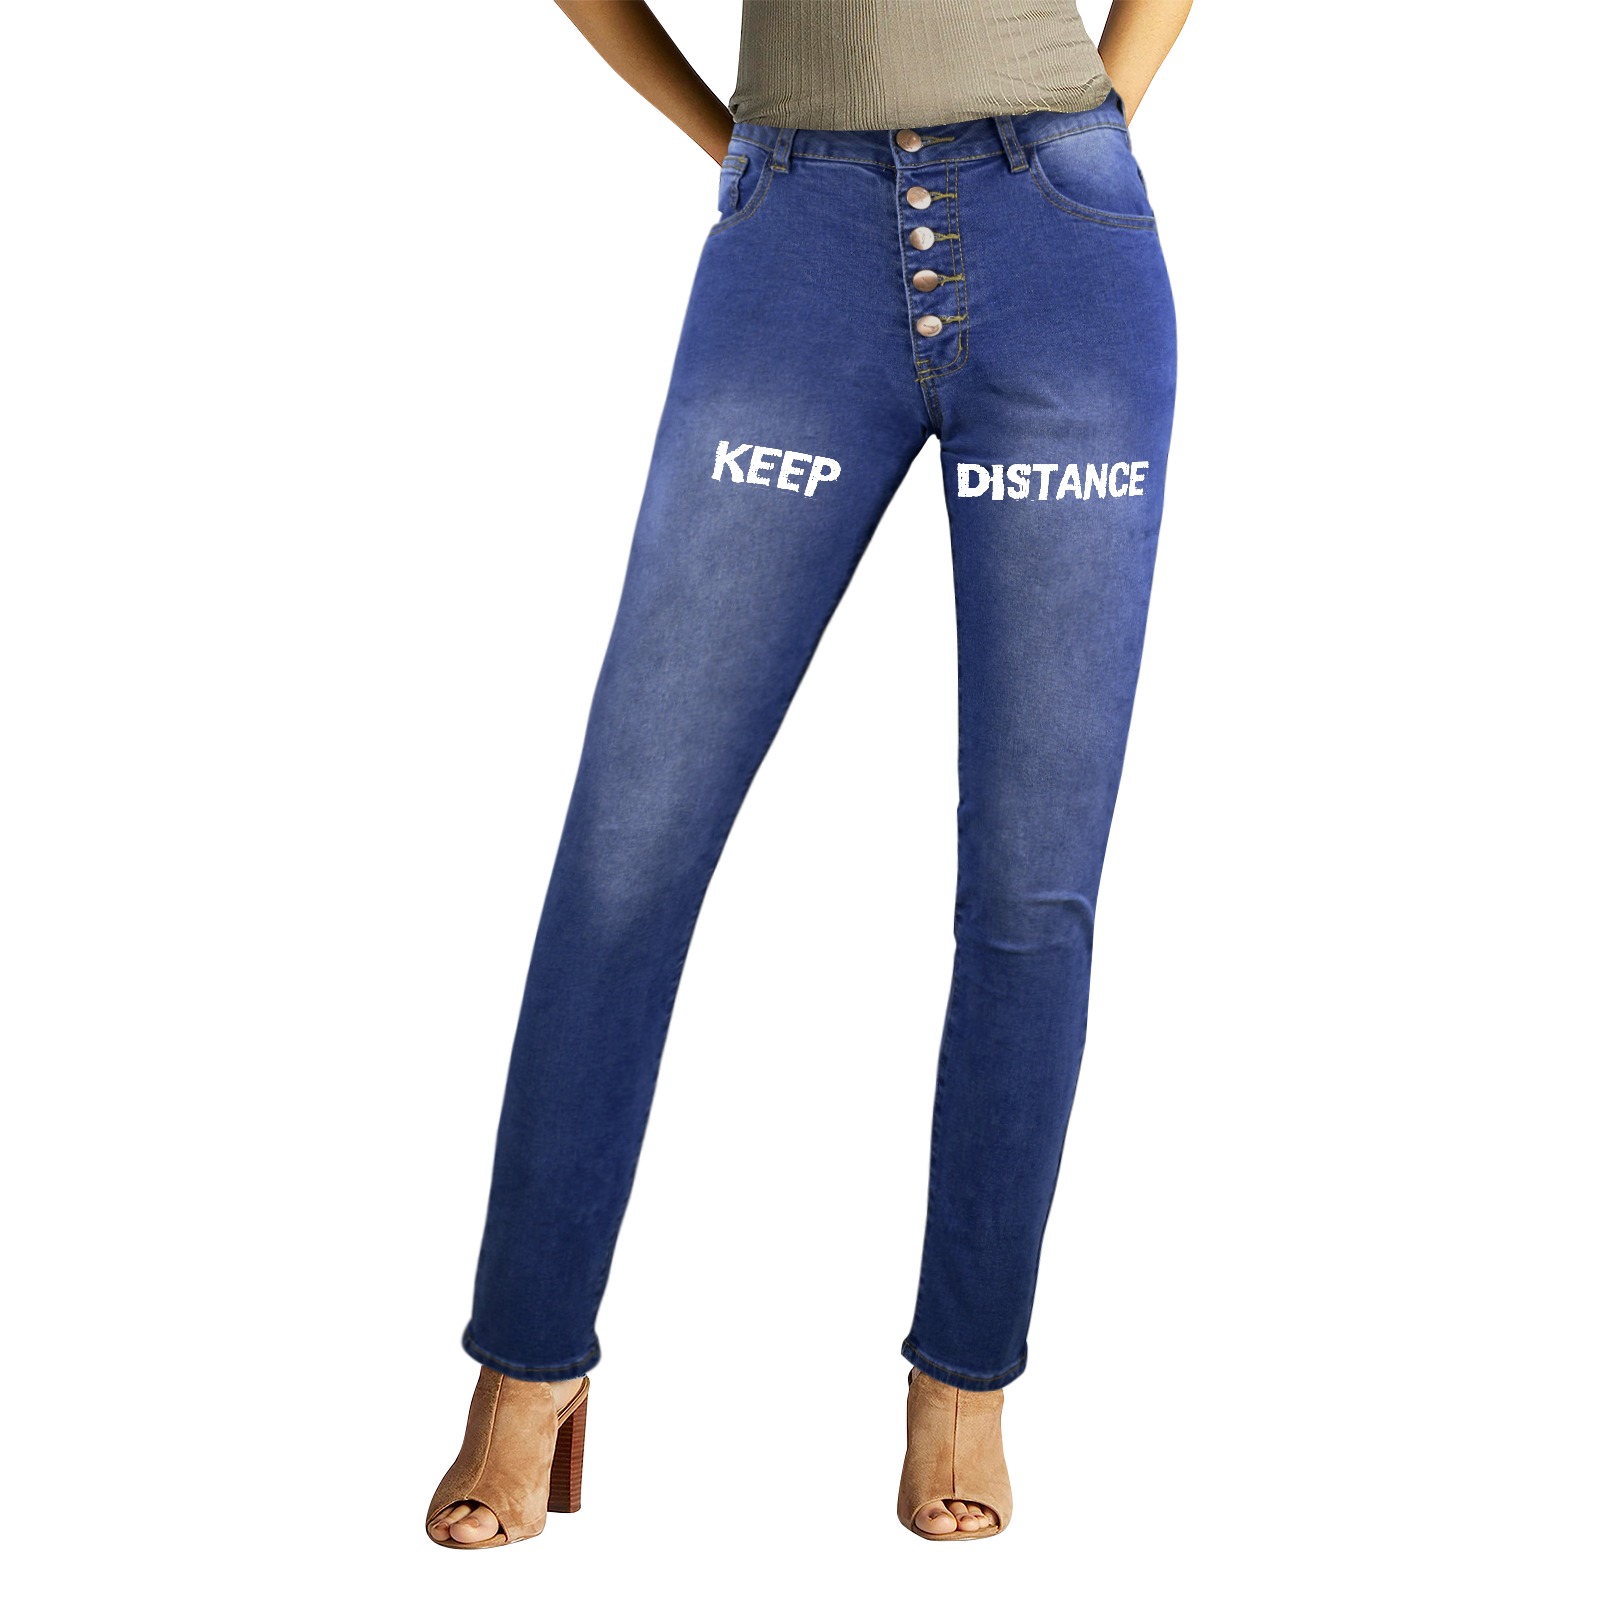 Keep Distance funny text art. Women's Jeans (Front&Back Printing)